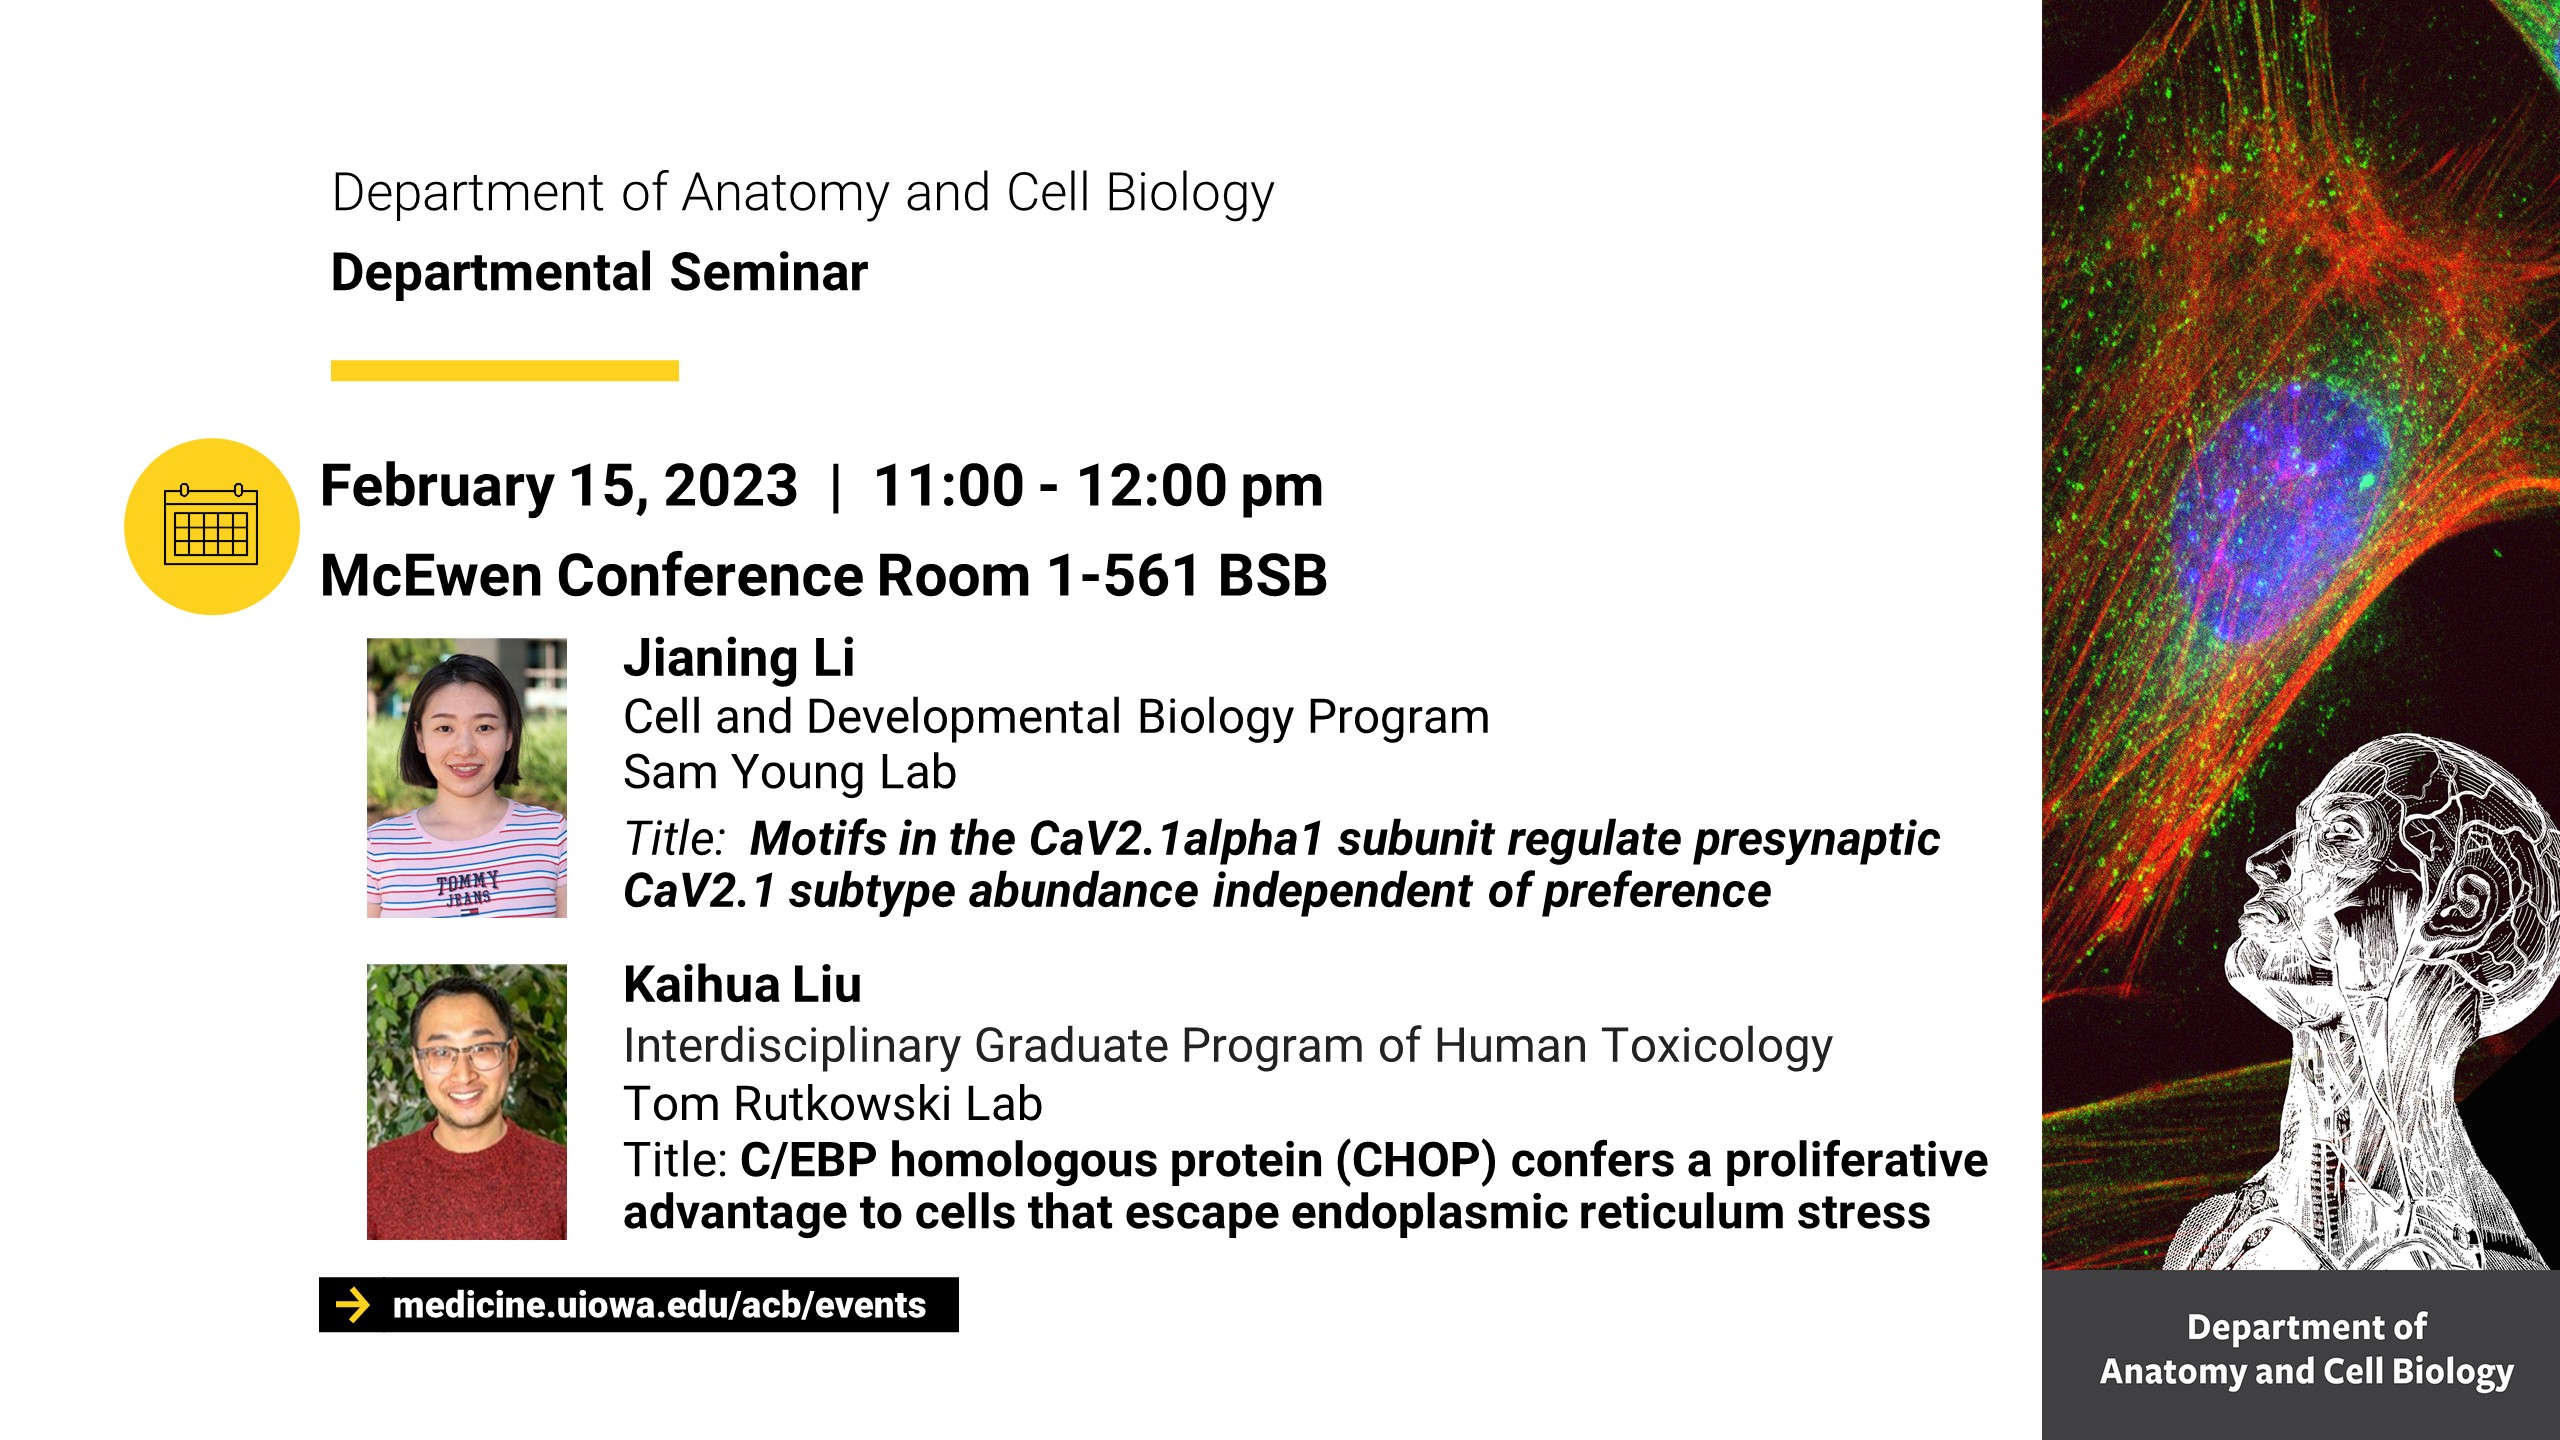 Anatomy and Cell Biology Departmental Seminar promotional image